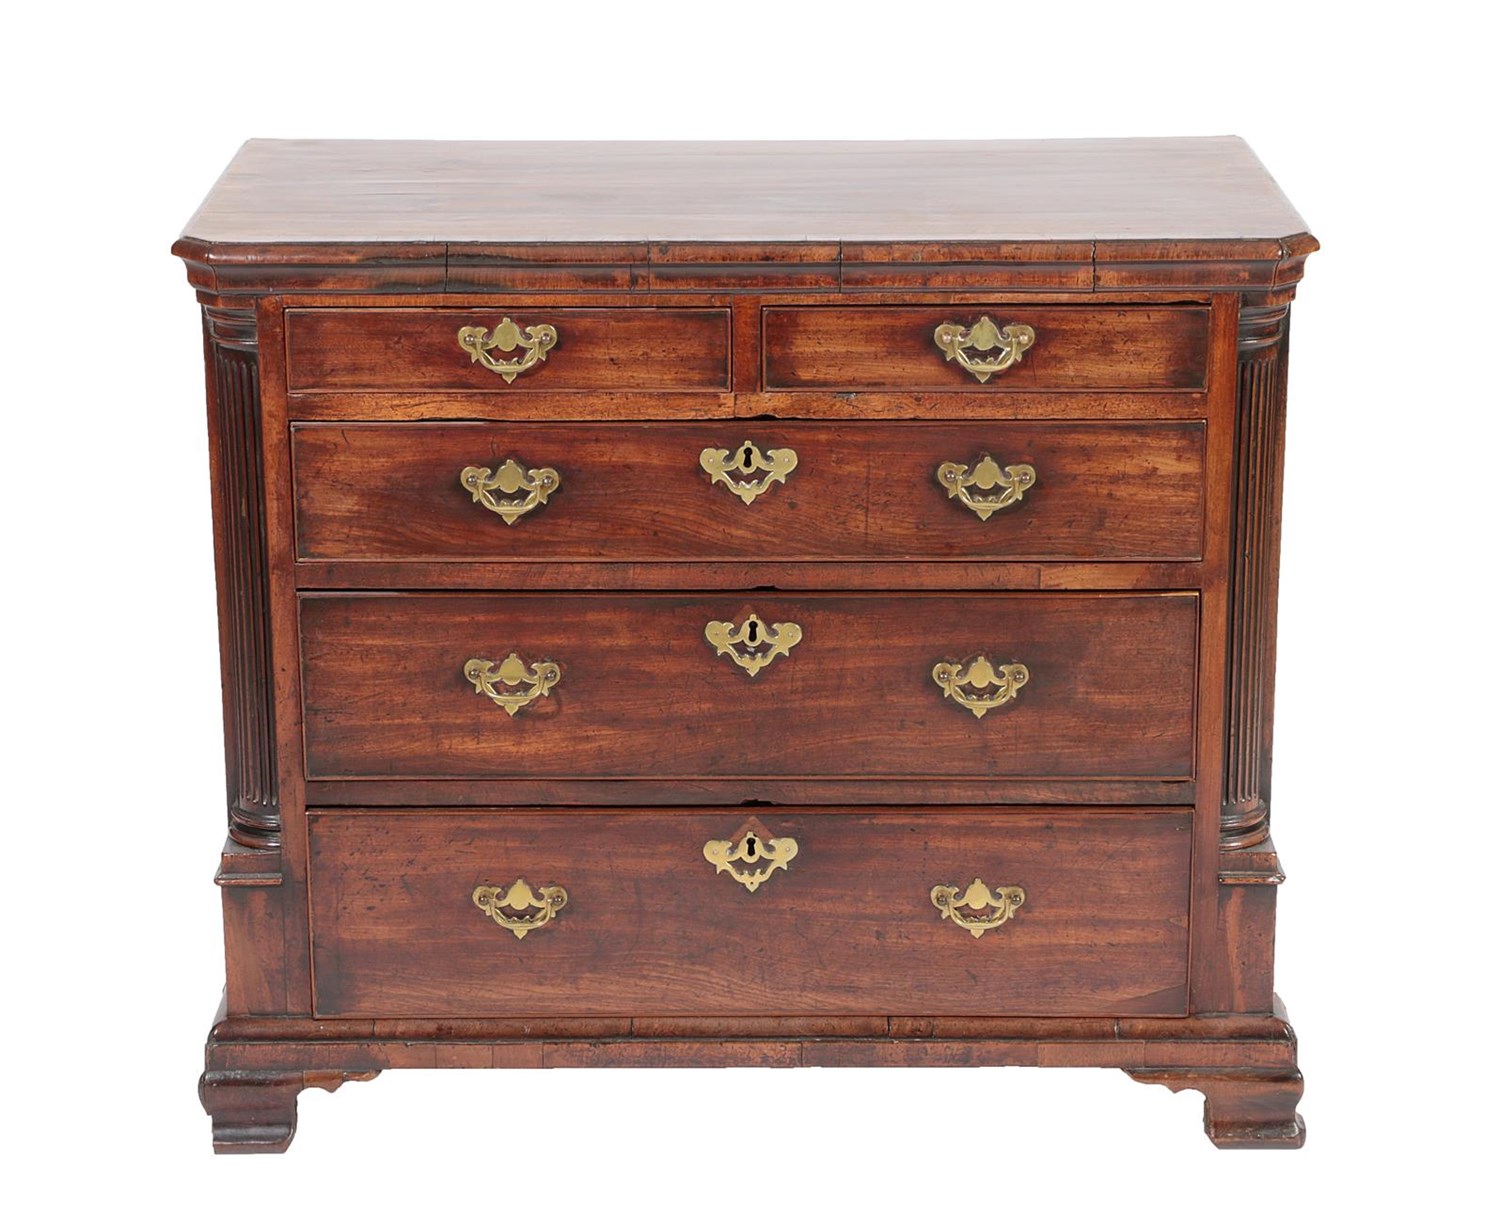 Lot 523 - A George III Mahogany and Crossbanded Straight Front Chest of Drawers, circa 1760, the moulded...